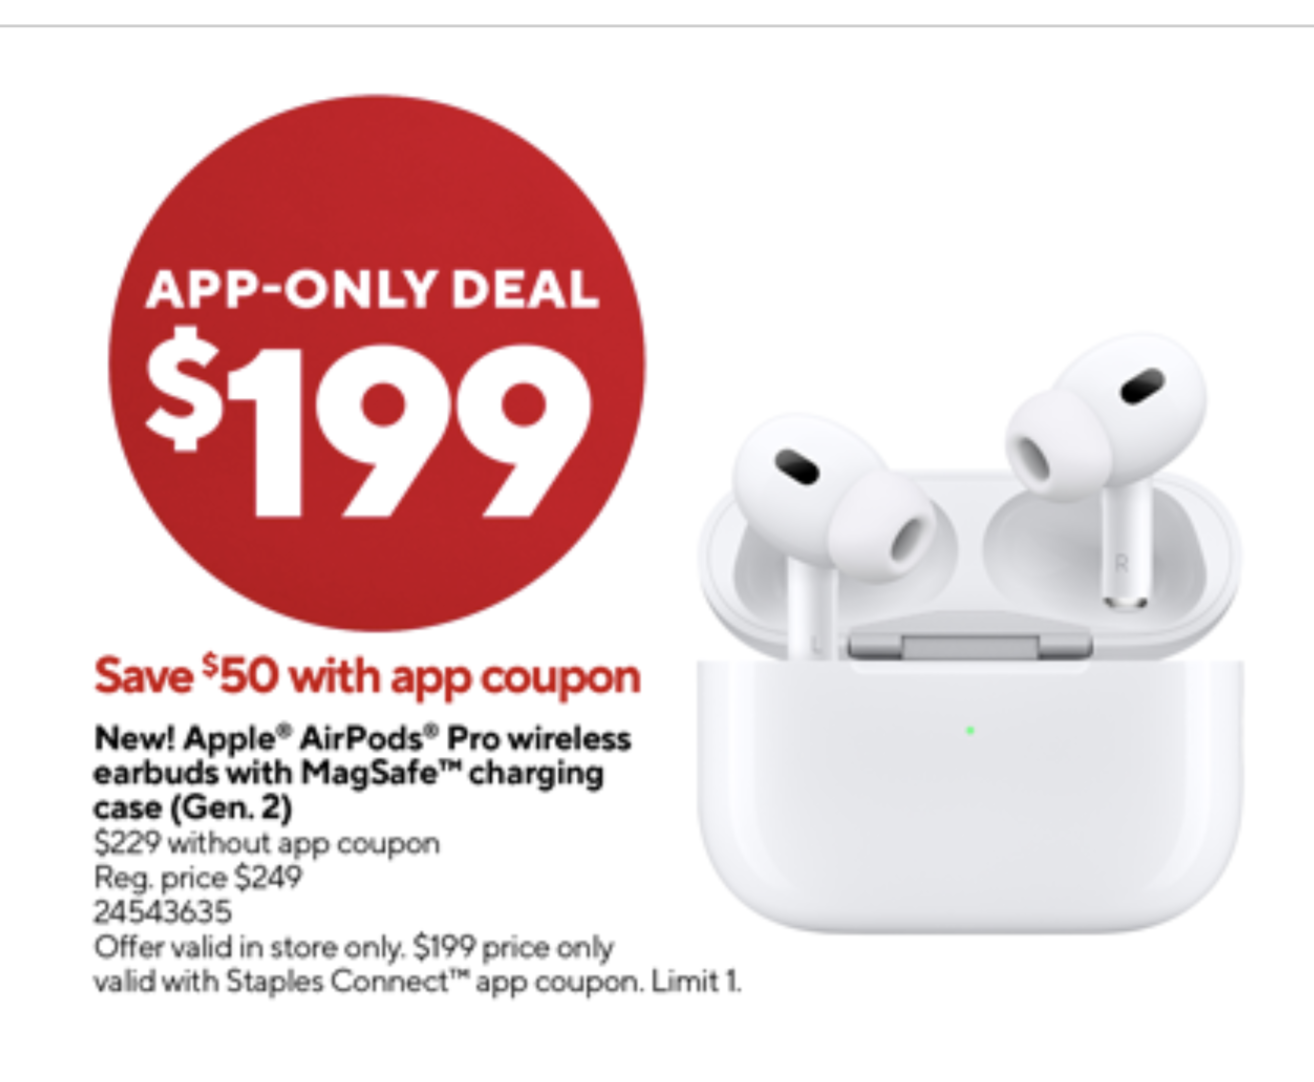 Spectacular Automation Booth Airpods Pro Gen 2 $199 at Staples AC via App